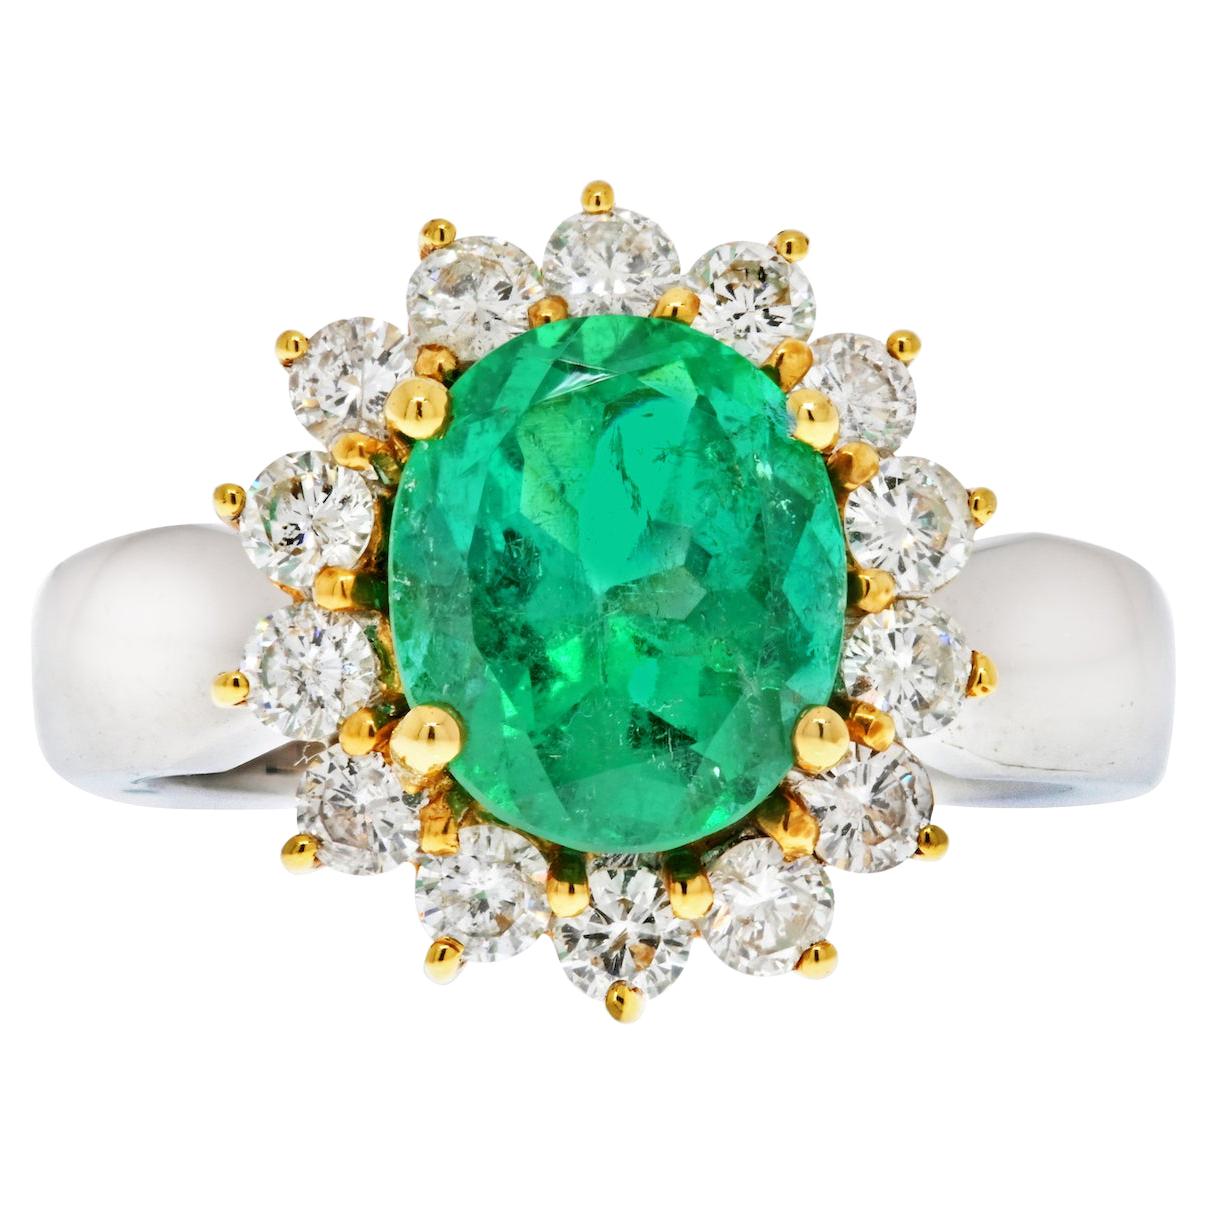 Oval Cut 3 Carat Colombian Emerald and Diamond Halo 18K White Gold Ring